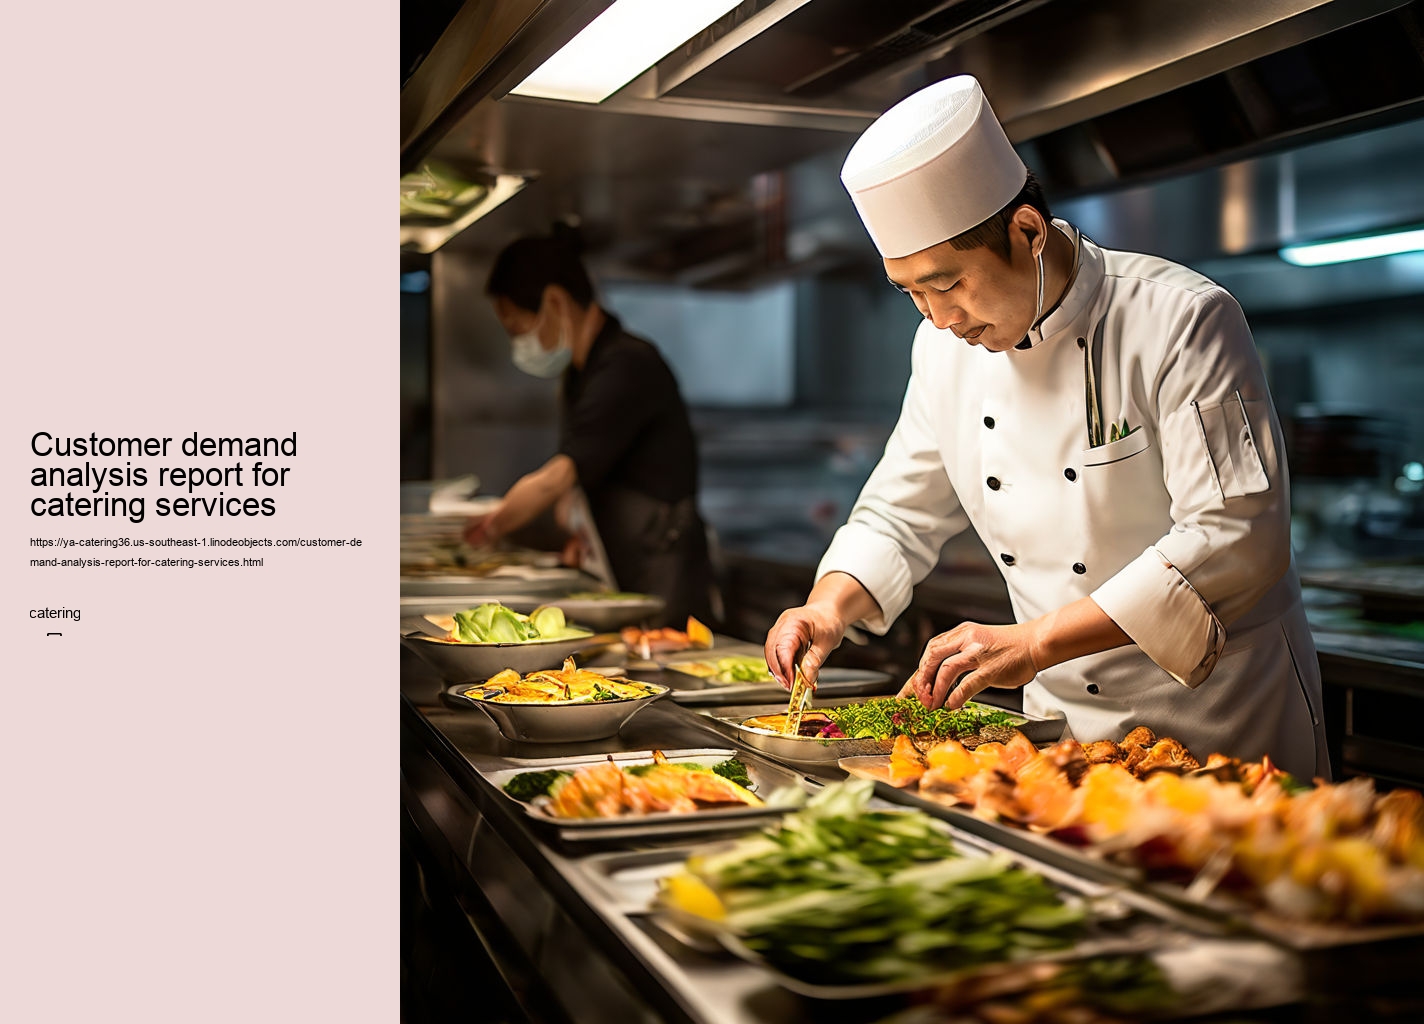 Customer demand analysis report for catering services